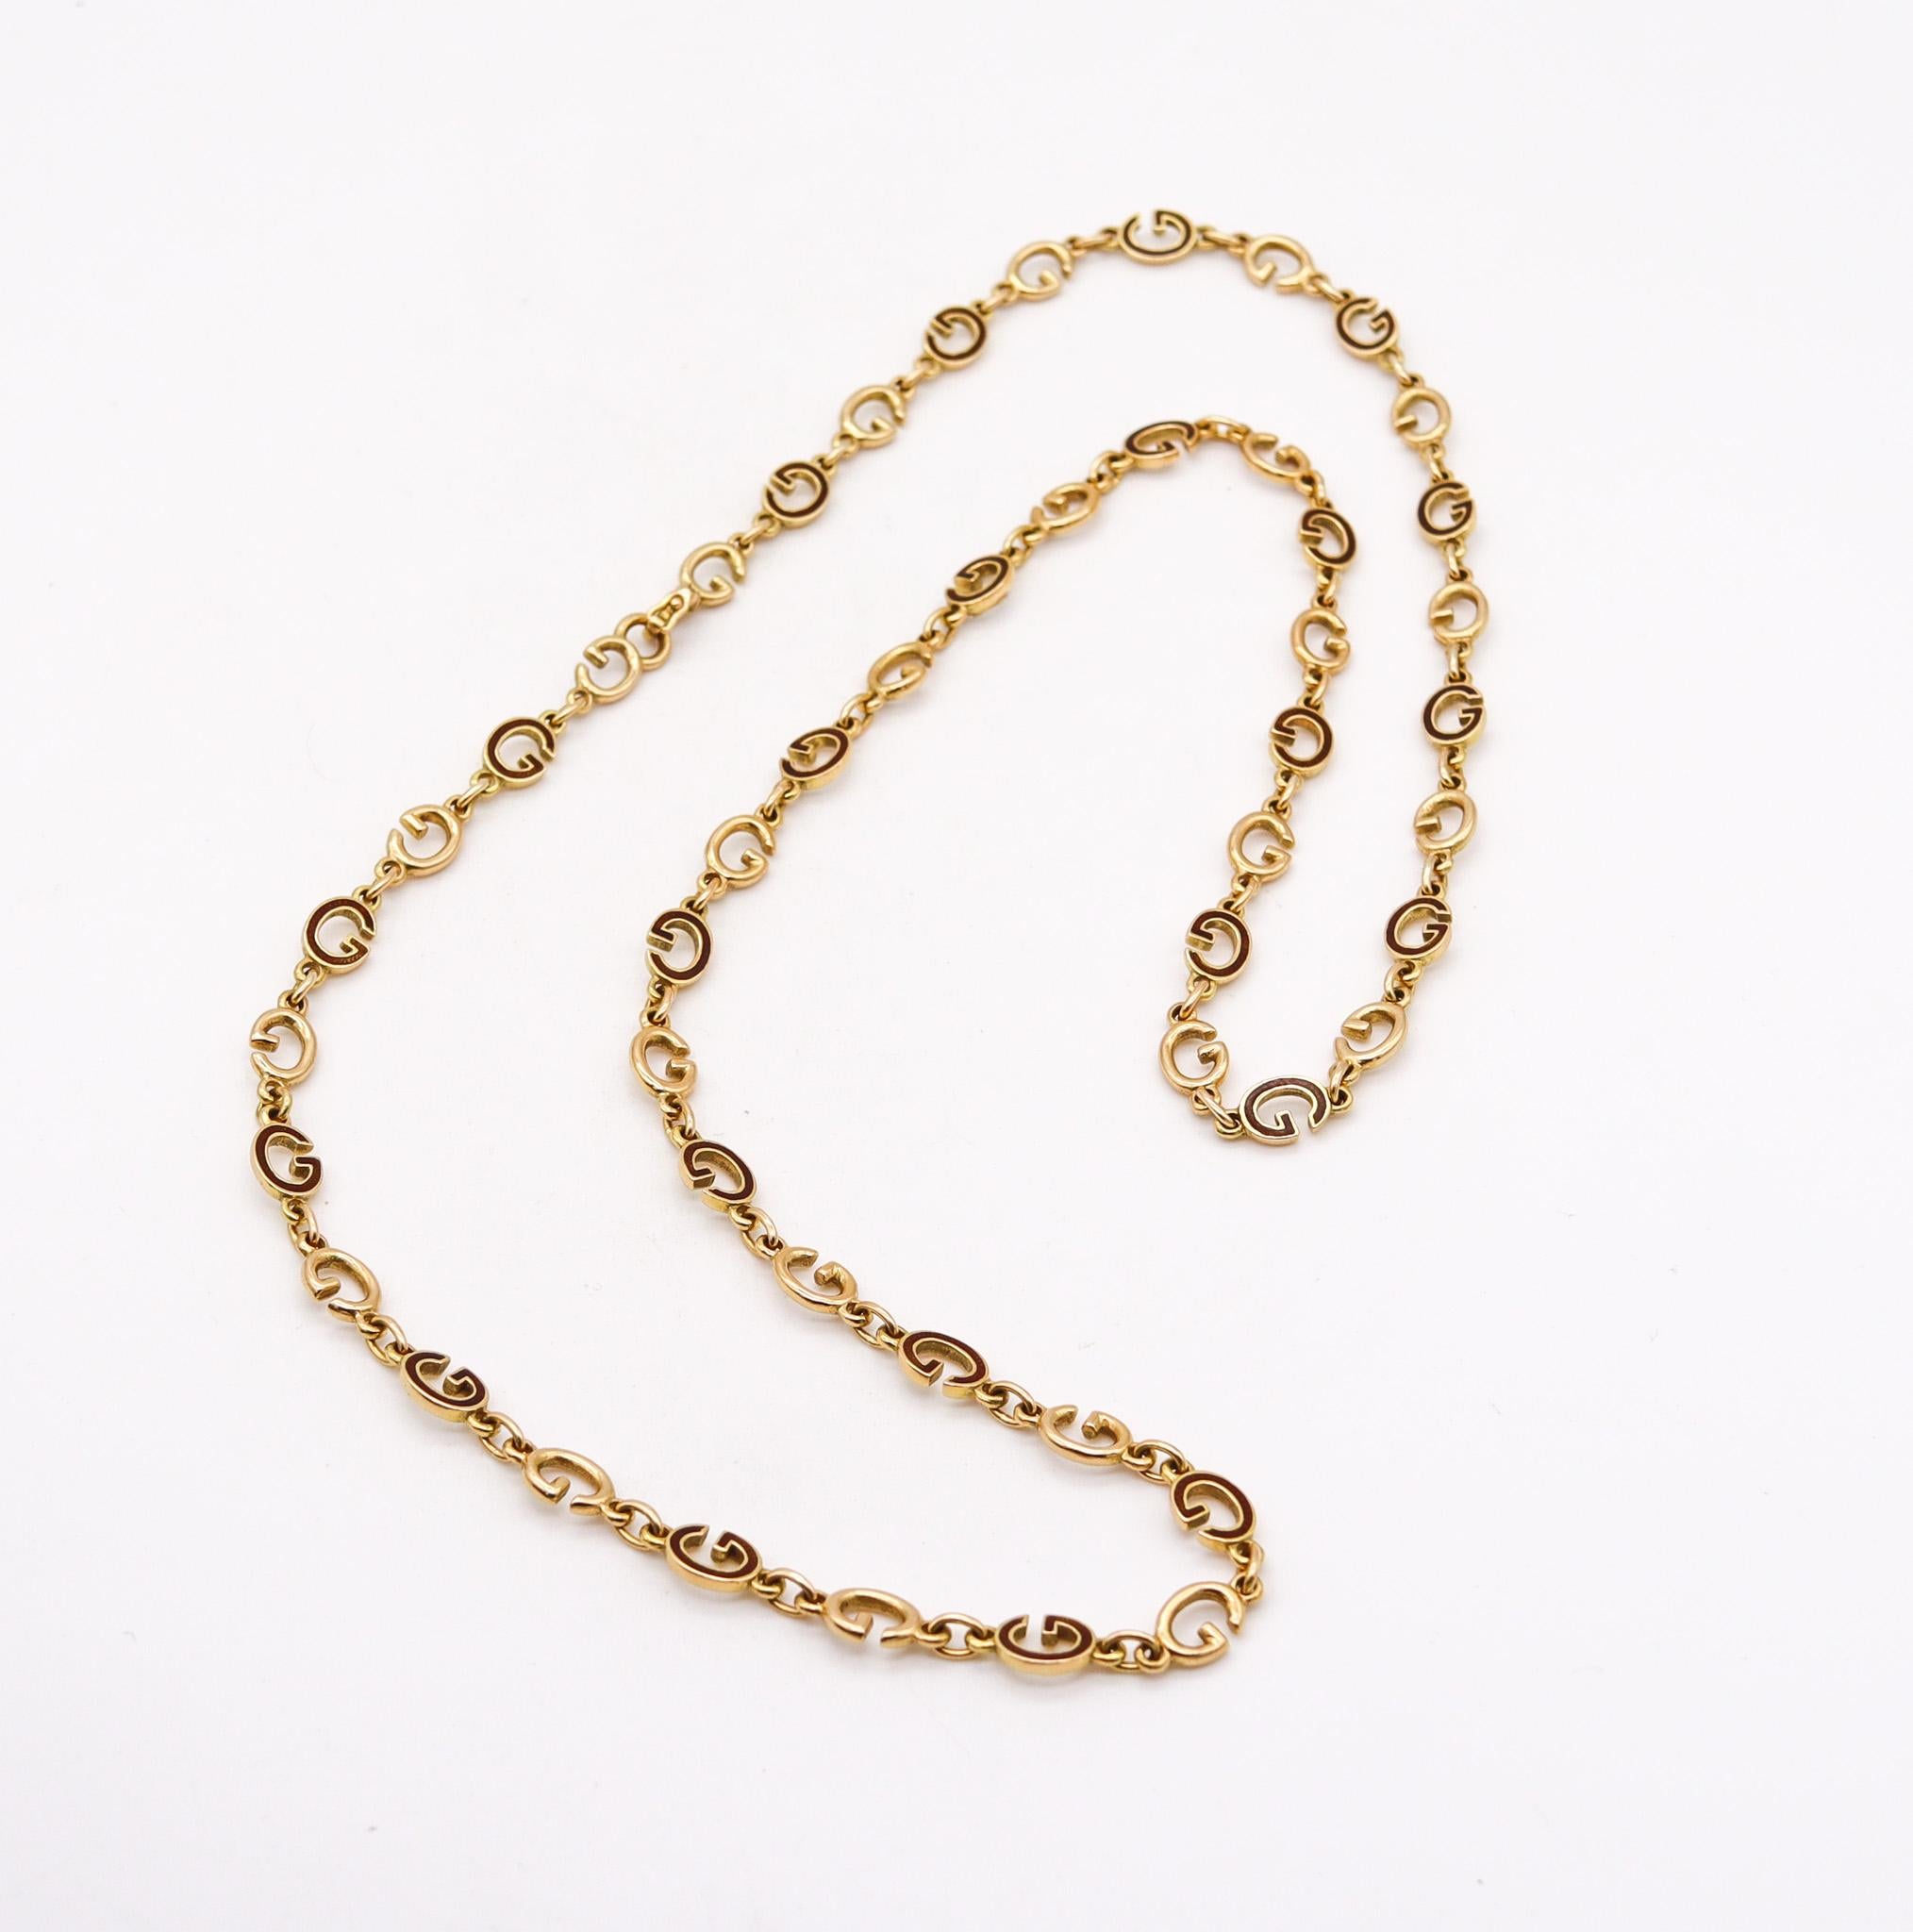 Long G necklace sautoir designed by Gucci.

Very rare statement piece, created in Milano Italy by the luxury house of Gucci, back in the 1970's. This vintage long drop sautoir necklace, was crafted with multiples links in the shapes of G's in solid